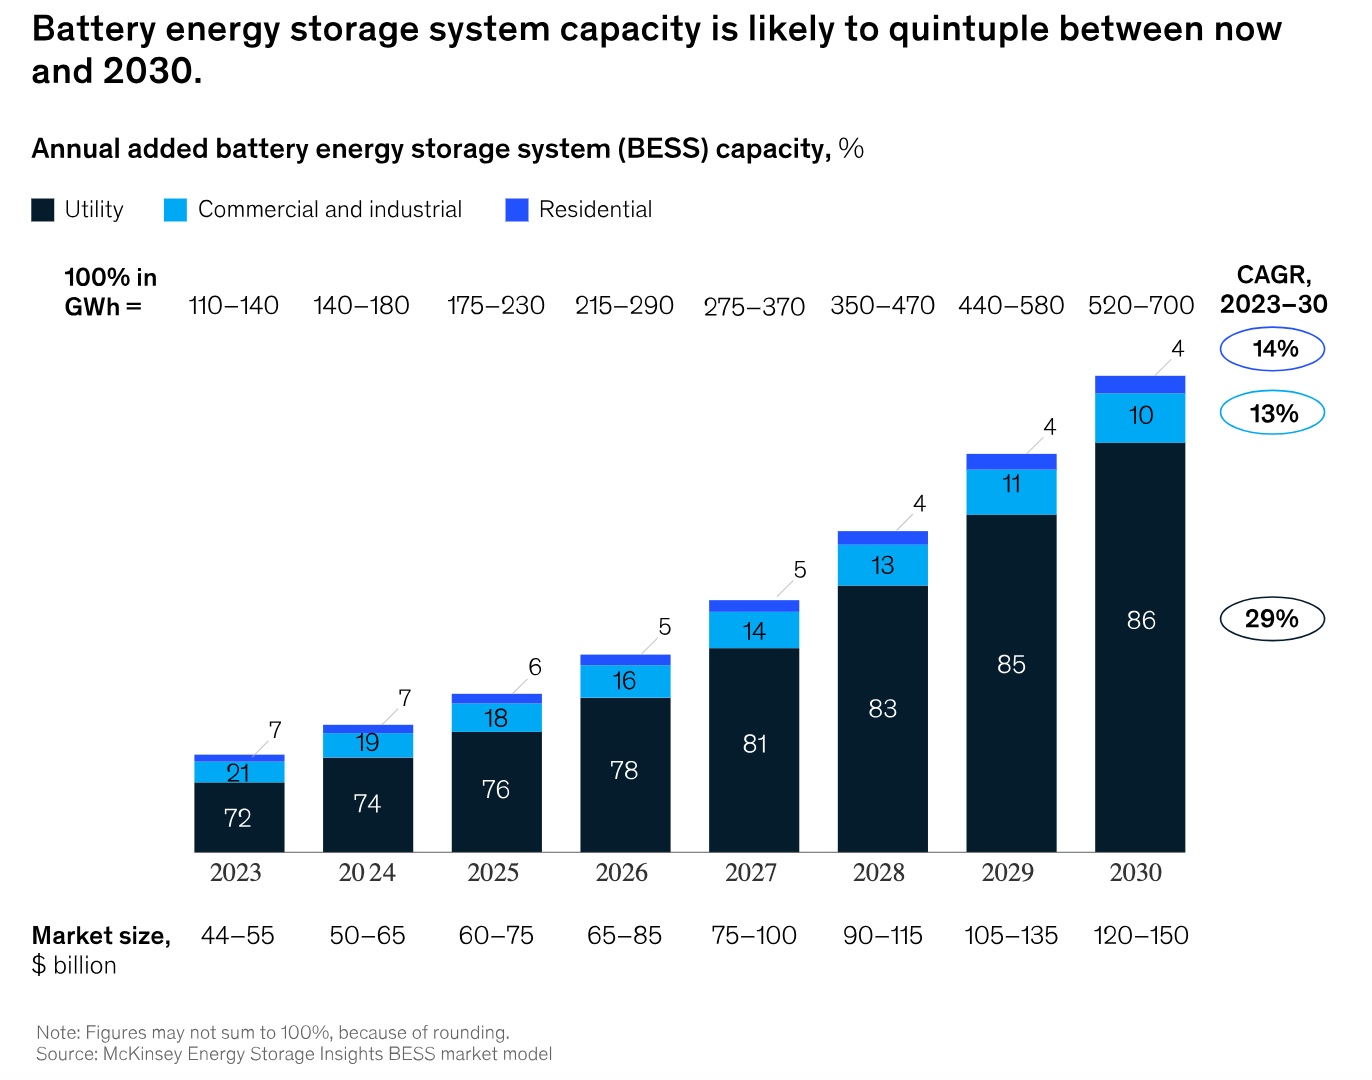 annual added battery energy storage system (BESS) capacity, %